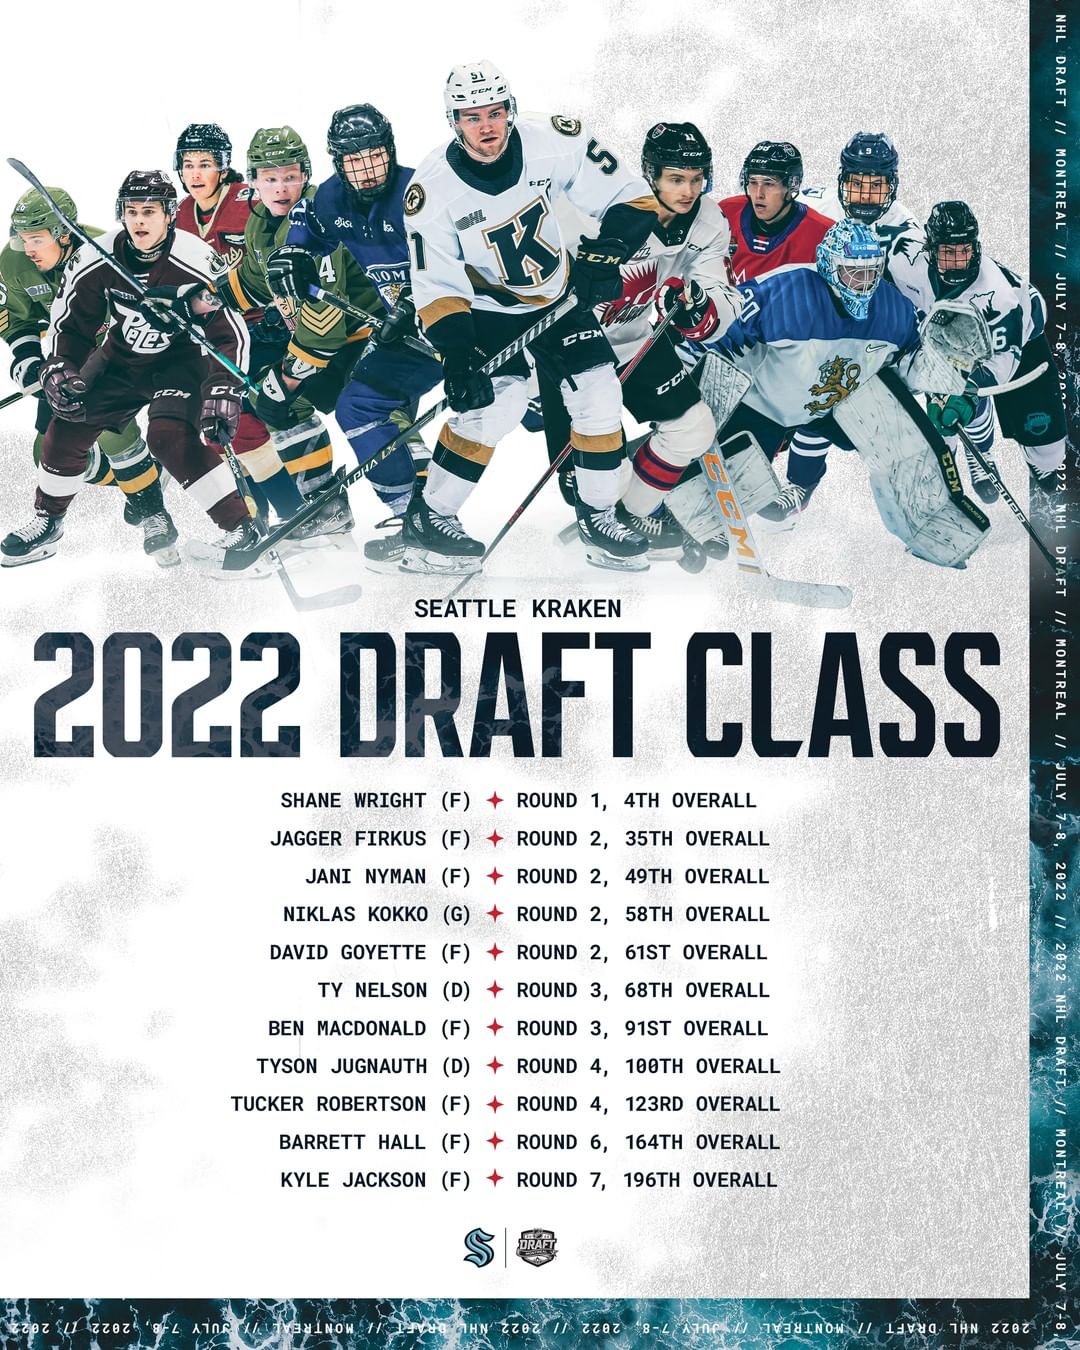 Say hello to your #SeaKraken 2022 Draft Class!...